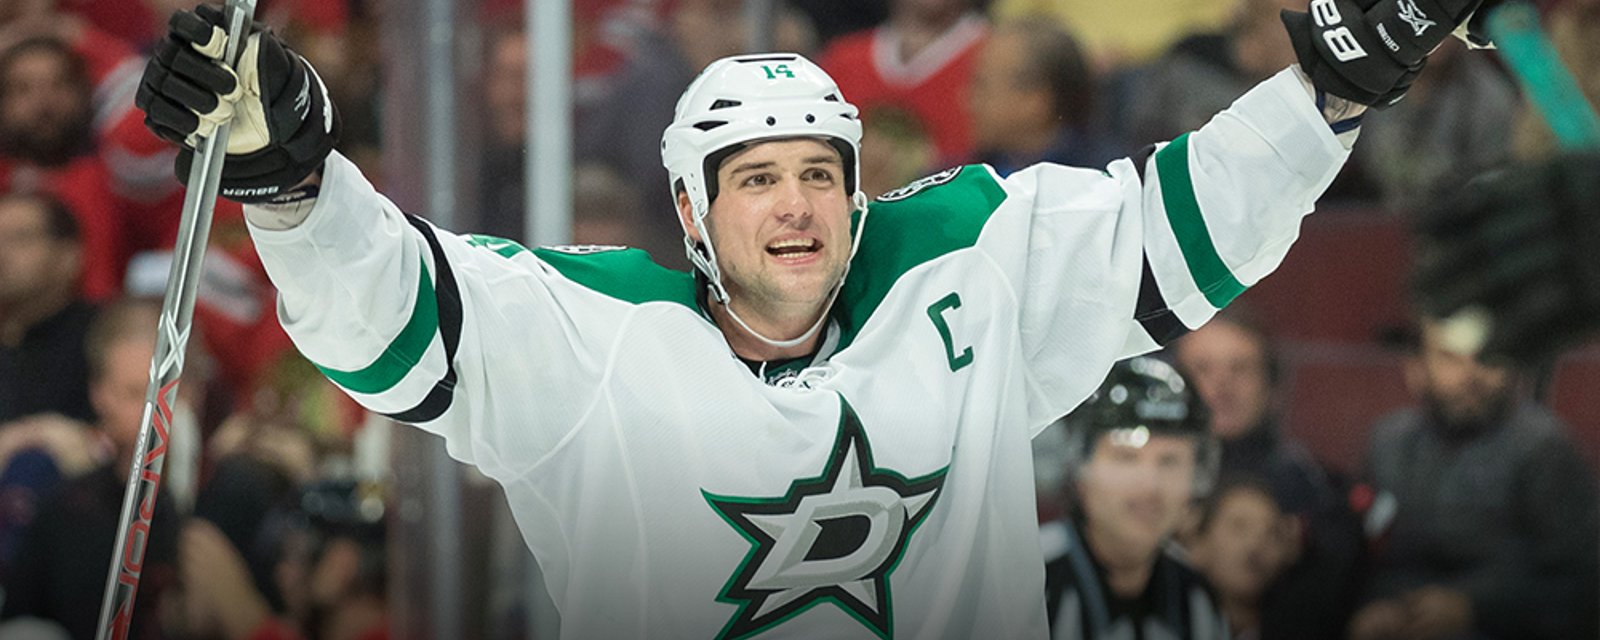 Your Call: Will the Stars make the playoffs in 2017-18?